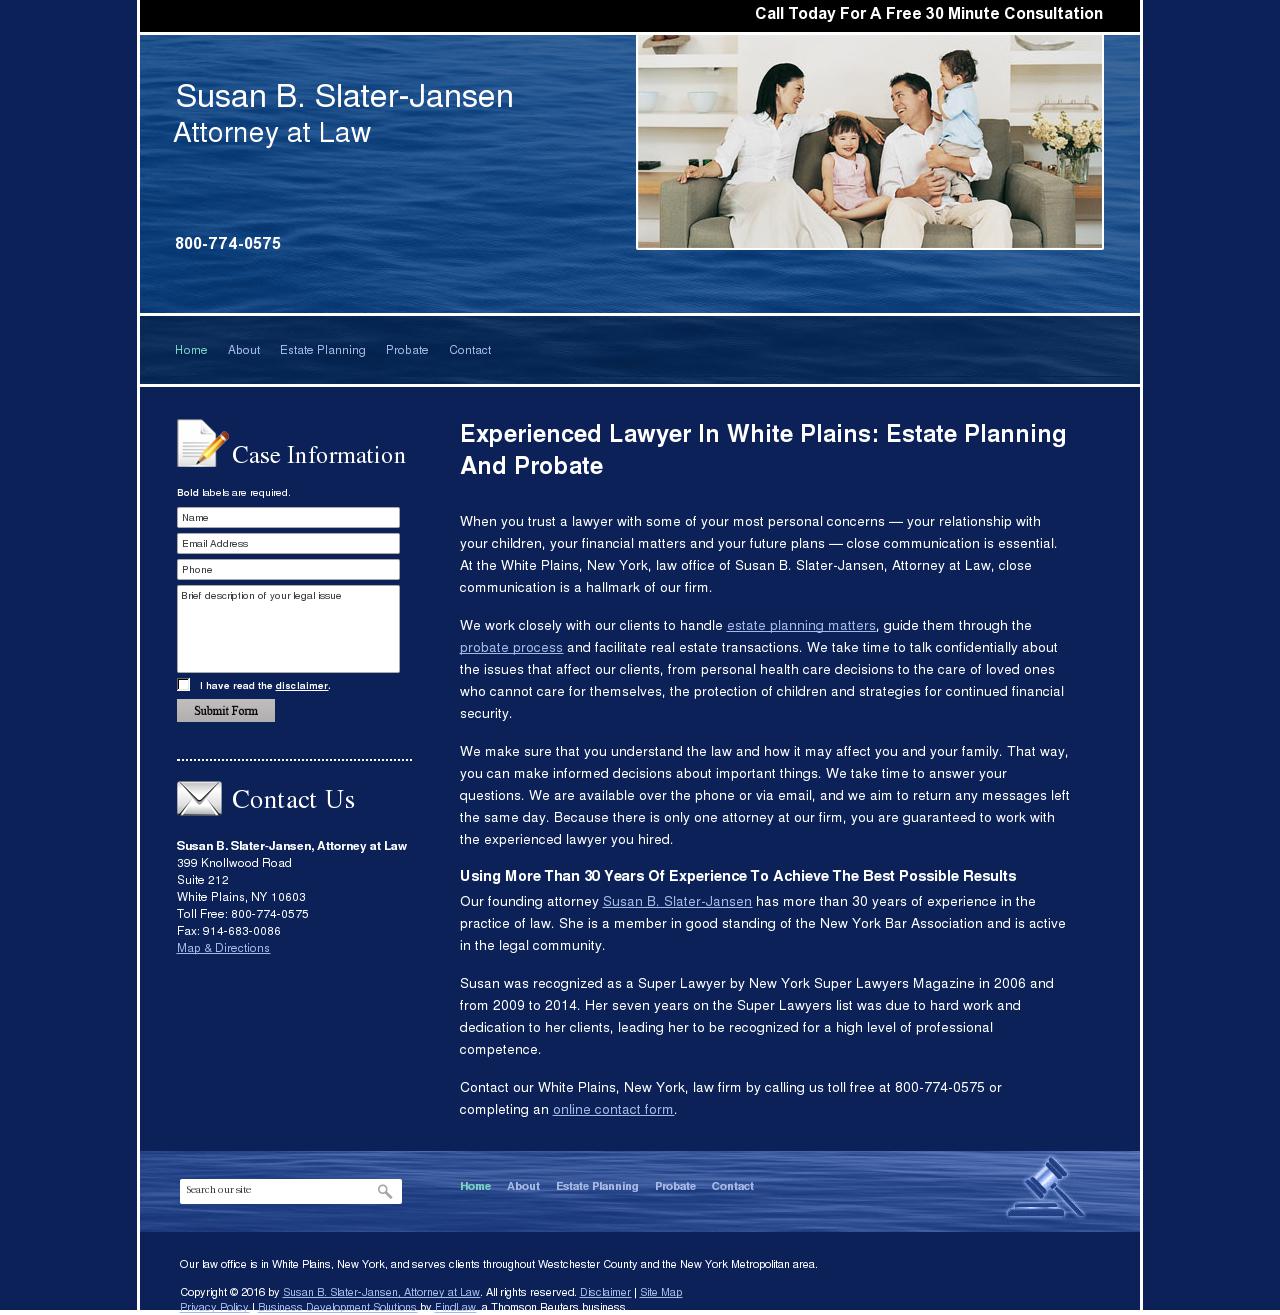 Susan B. Slater-Jansen, Attorney at Law - White Plains NY Lawyers